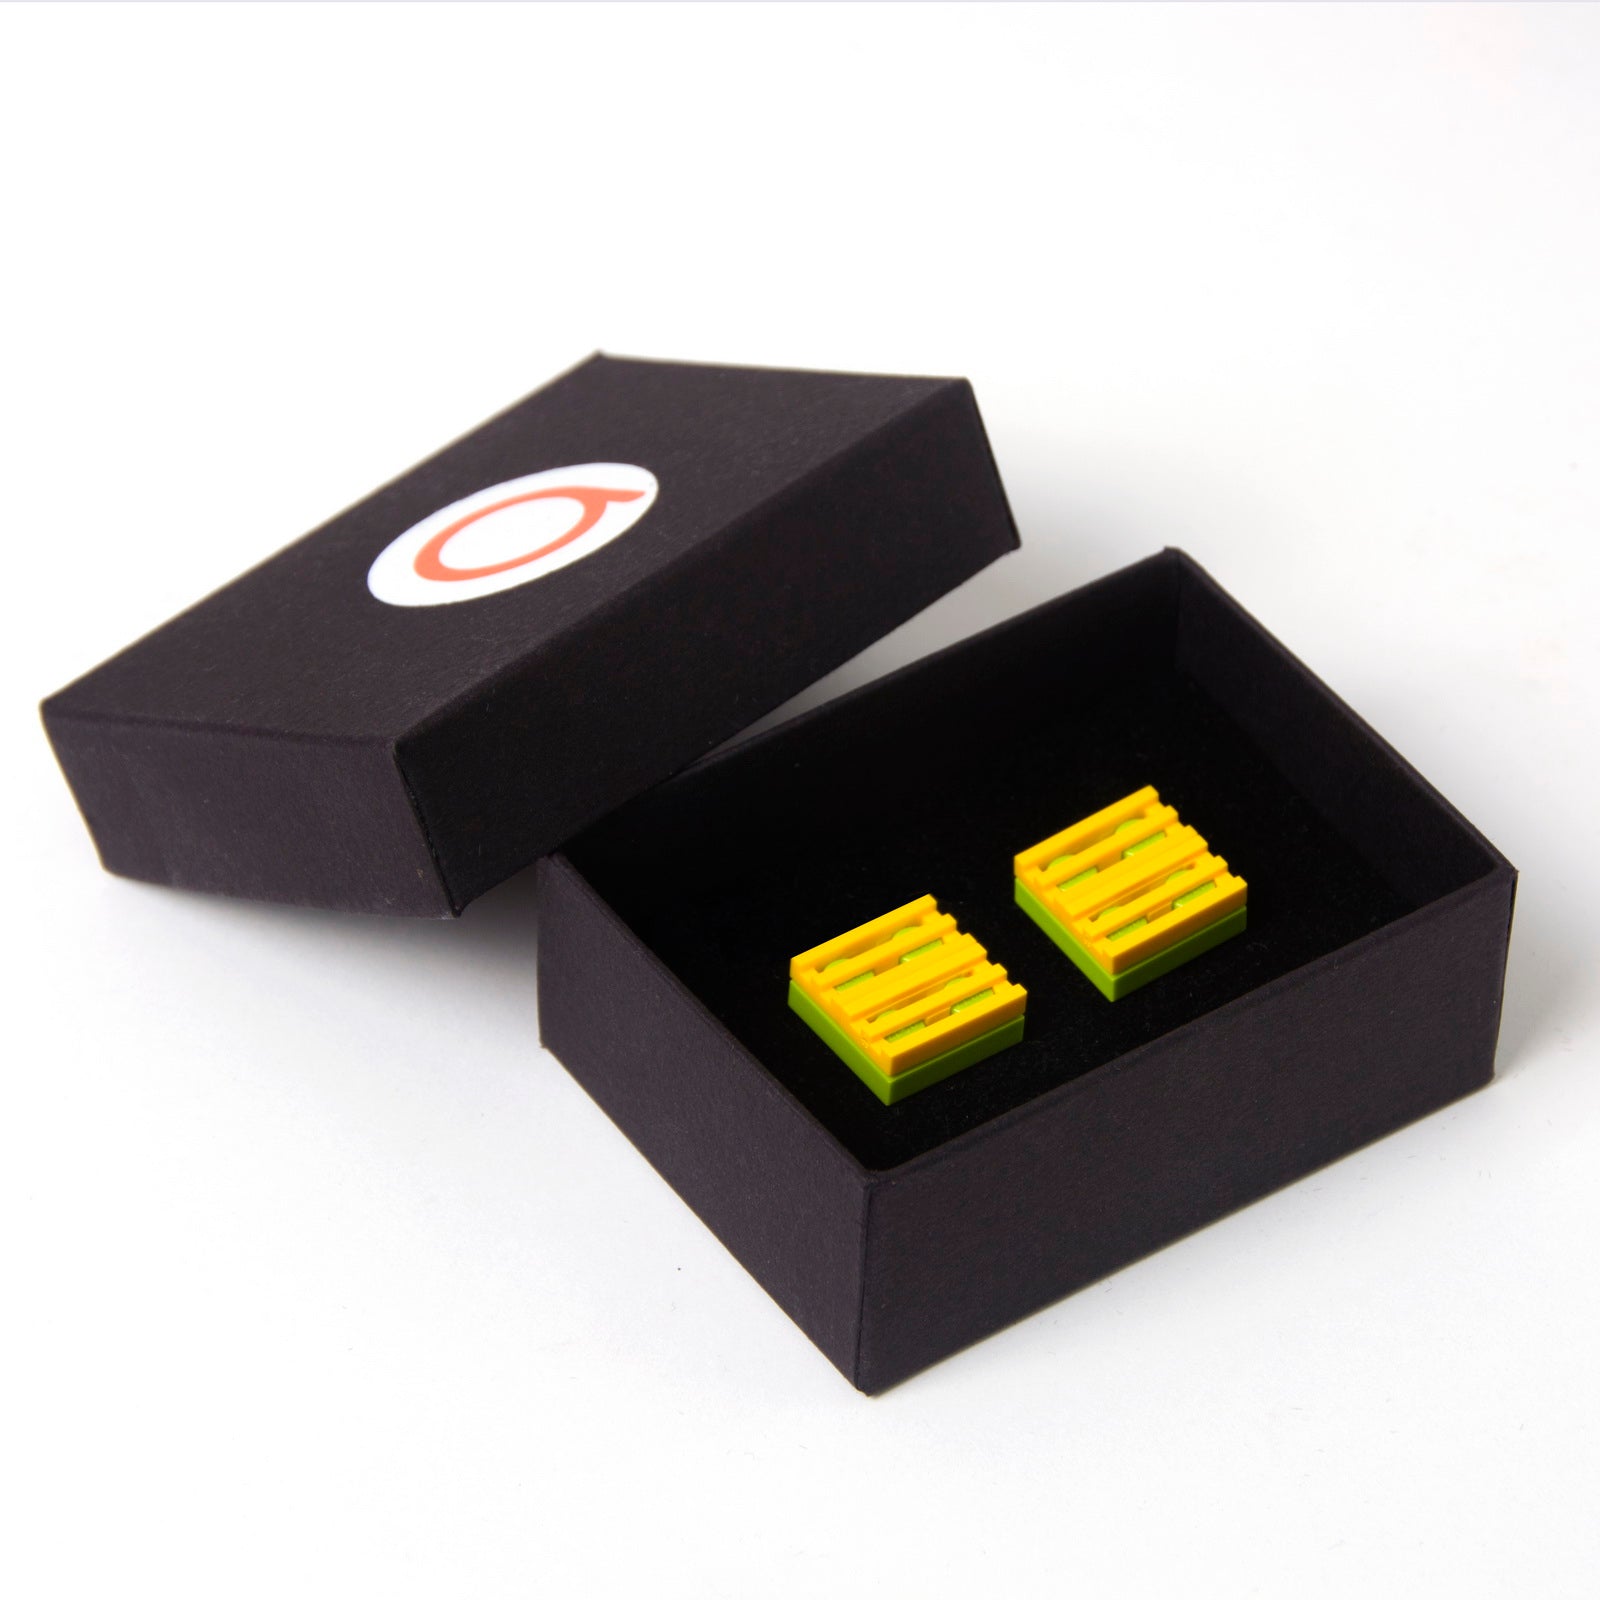 lime & yellow grill cufflinks